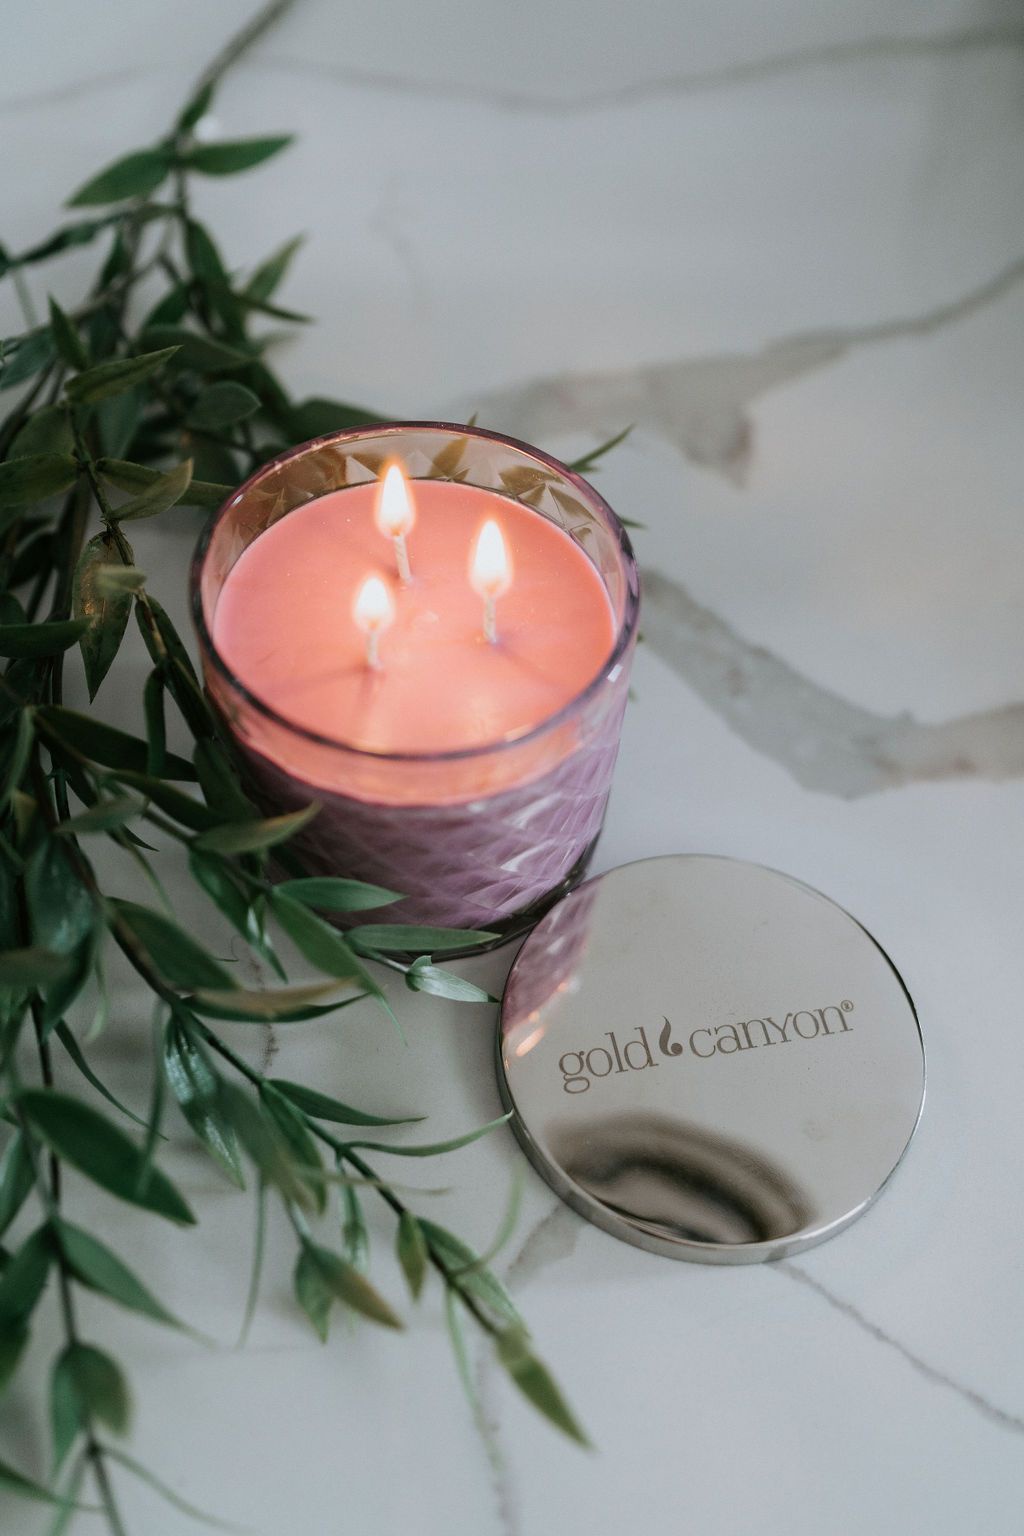 Title: Elevate Your Space with the Allure of Good-Smelling Candles